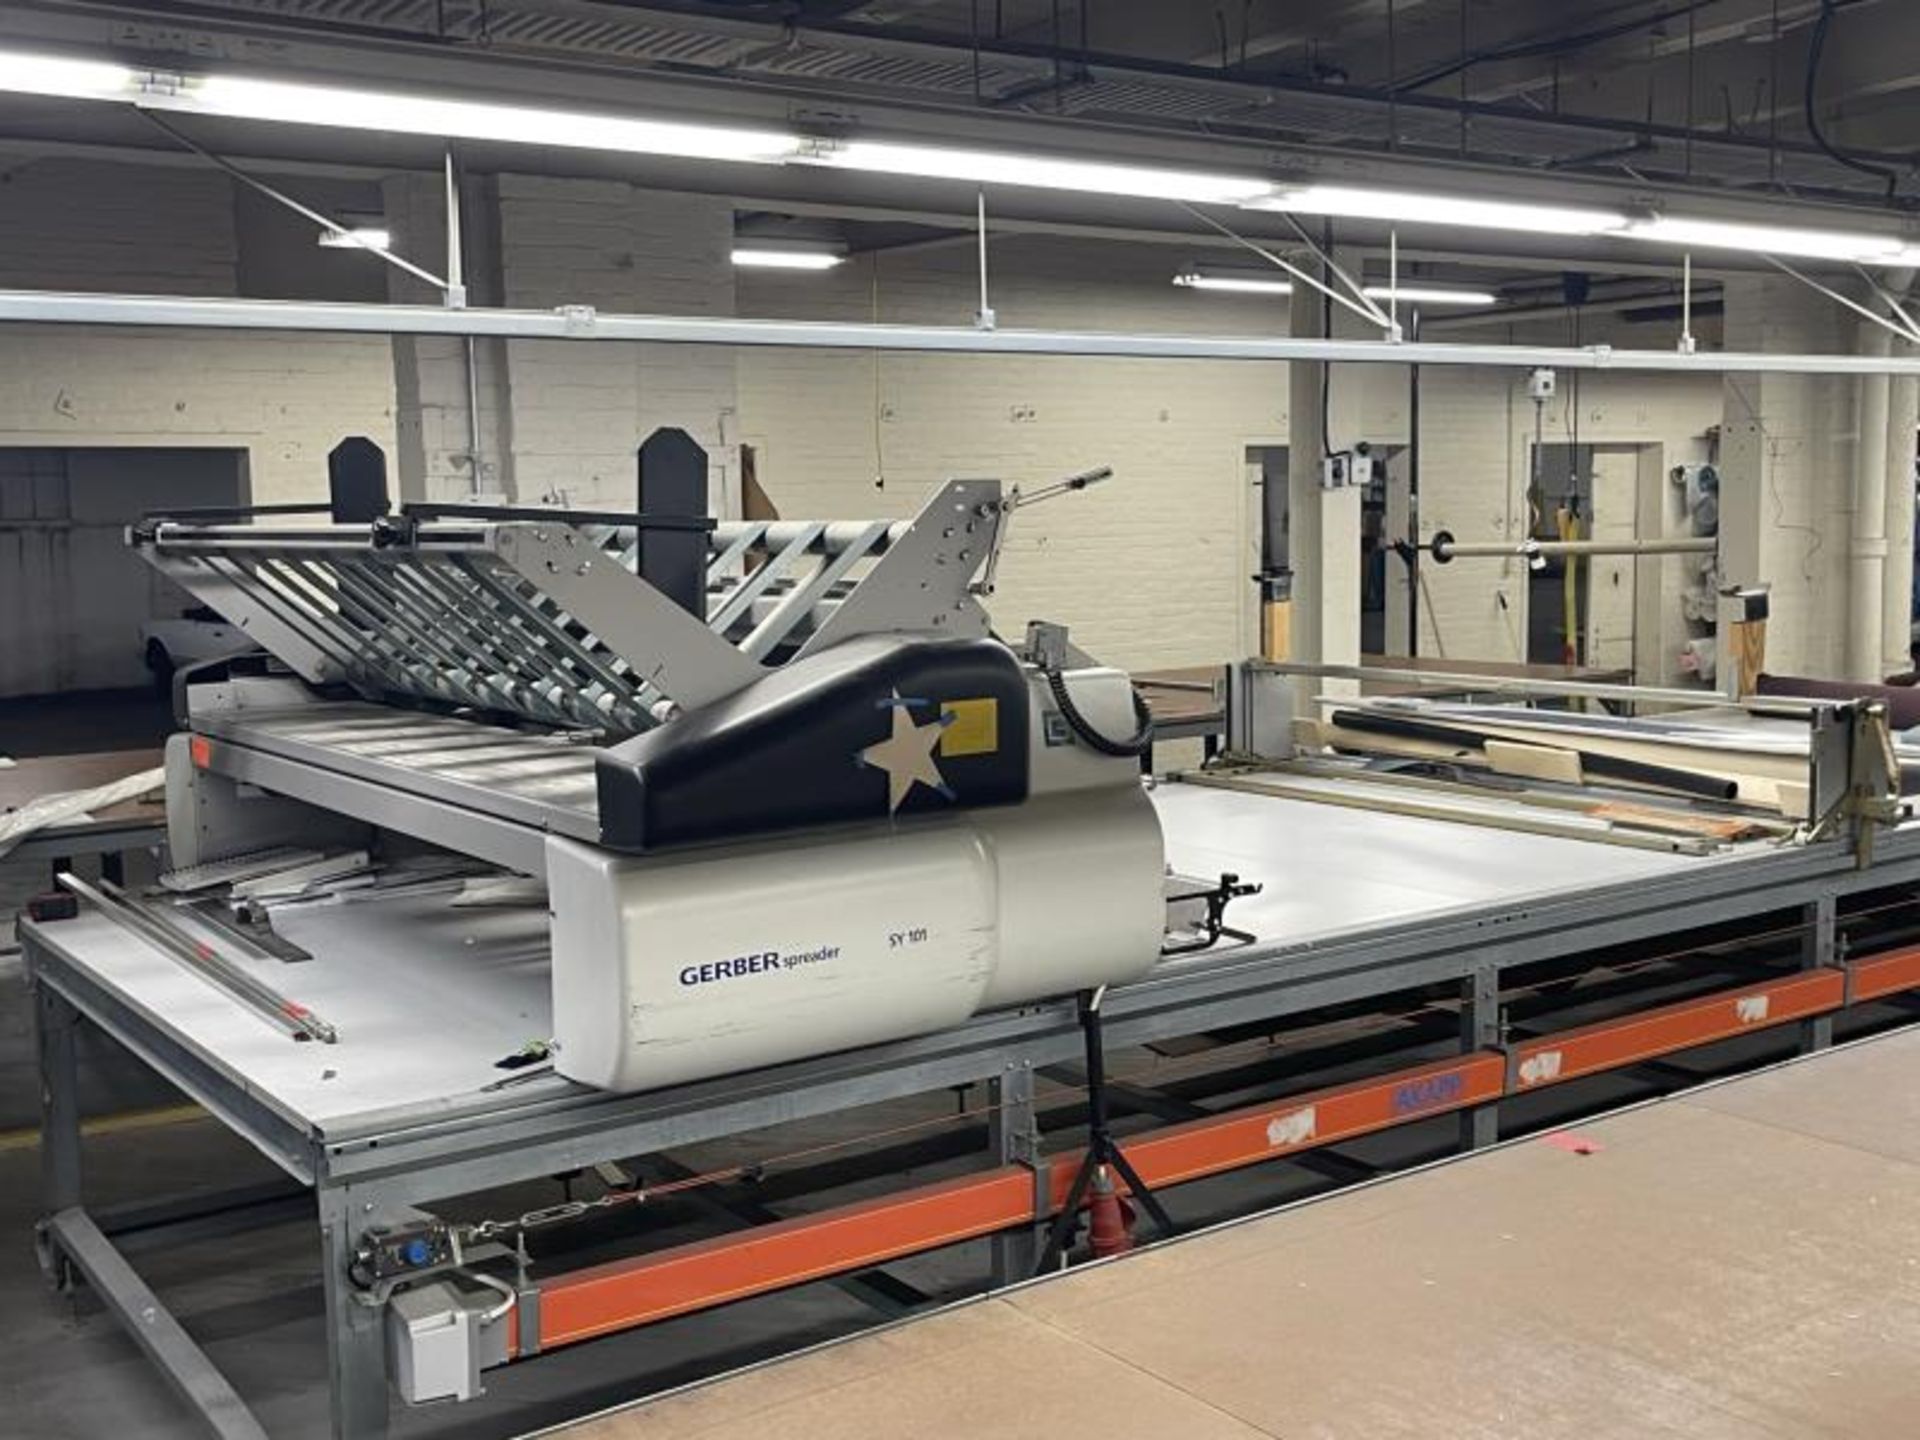 Gerber Spreader Machine with Transfer Table, Associated Equipment M: SY-101-1804 SN: 6405